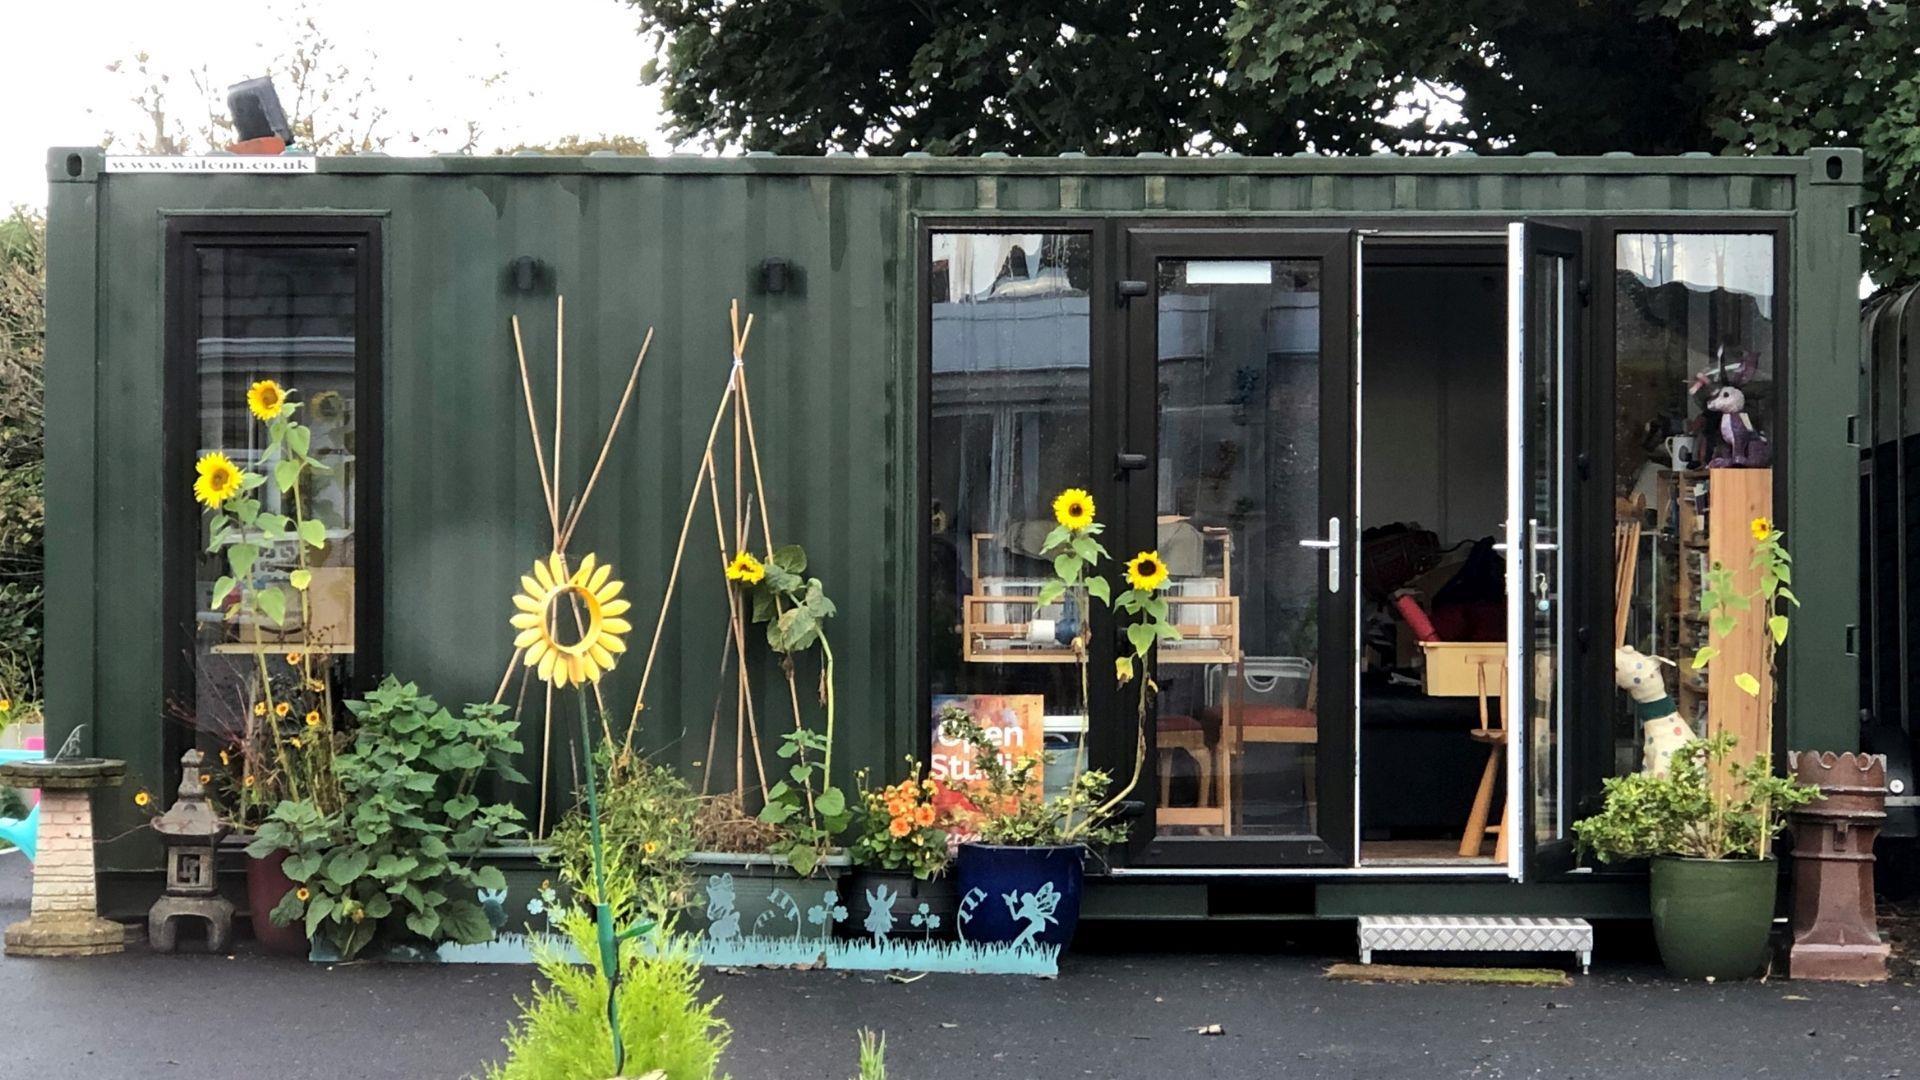 an image of an art studio made out of a storage container